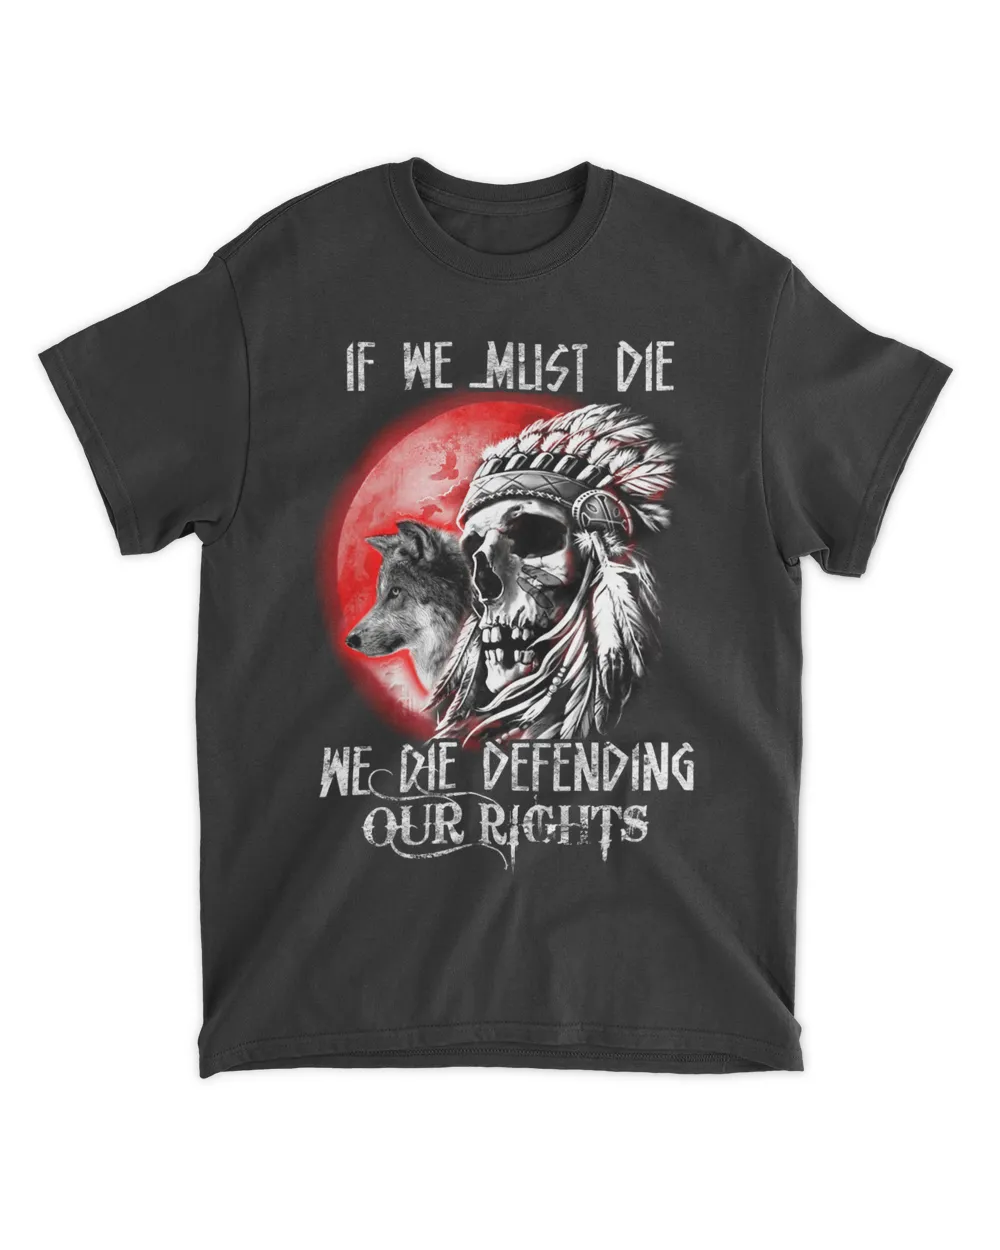 Native Die Defending Our Rights